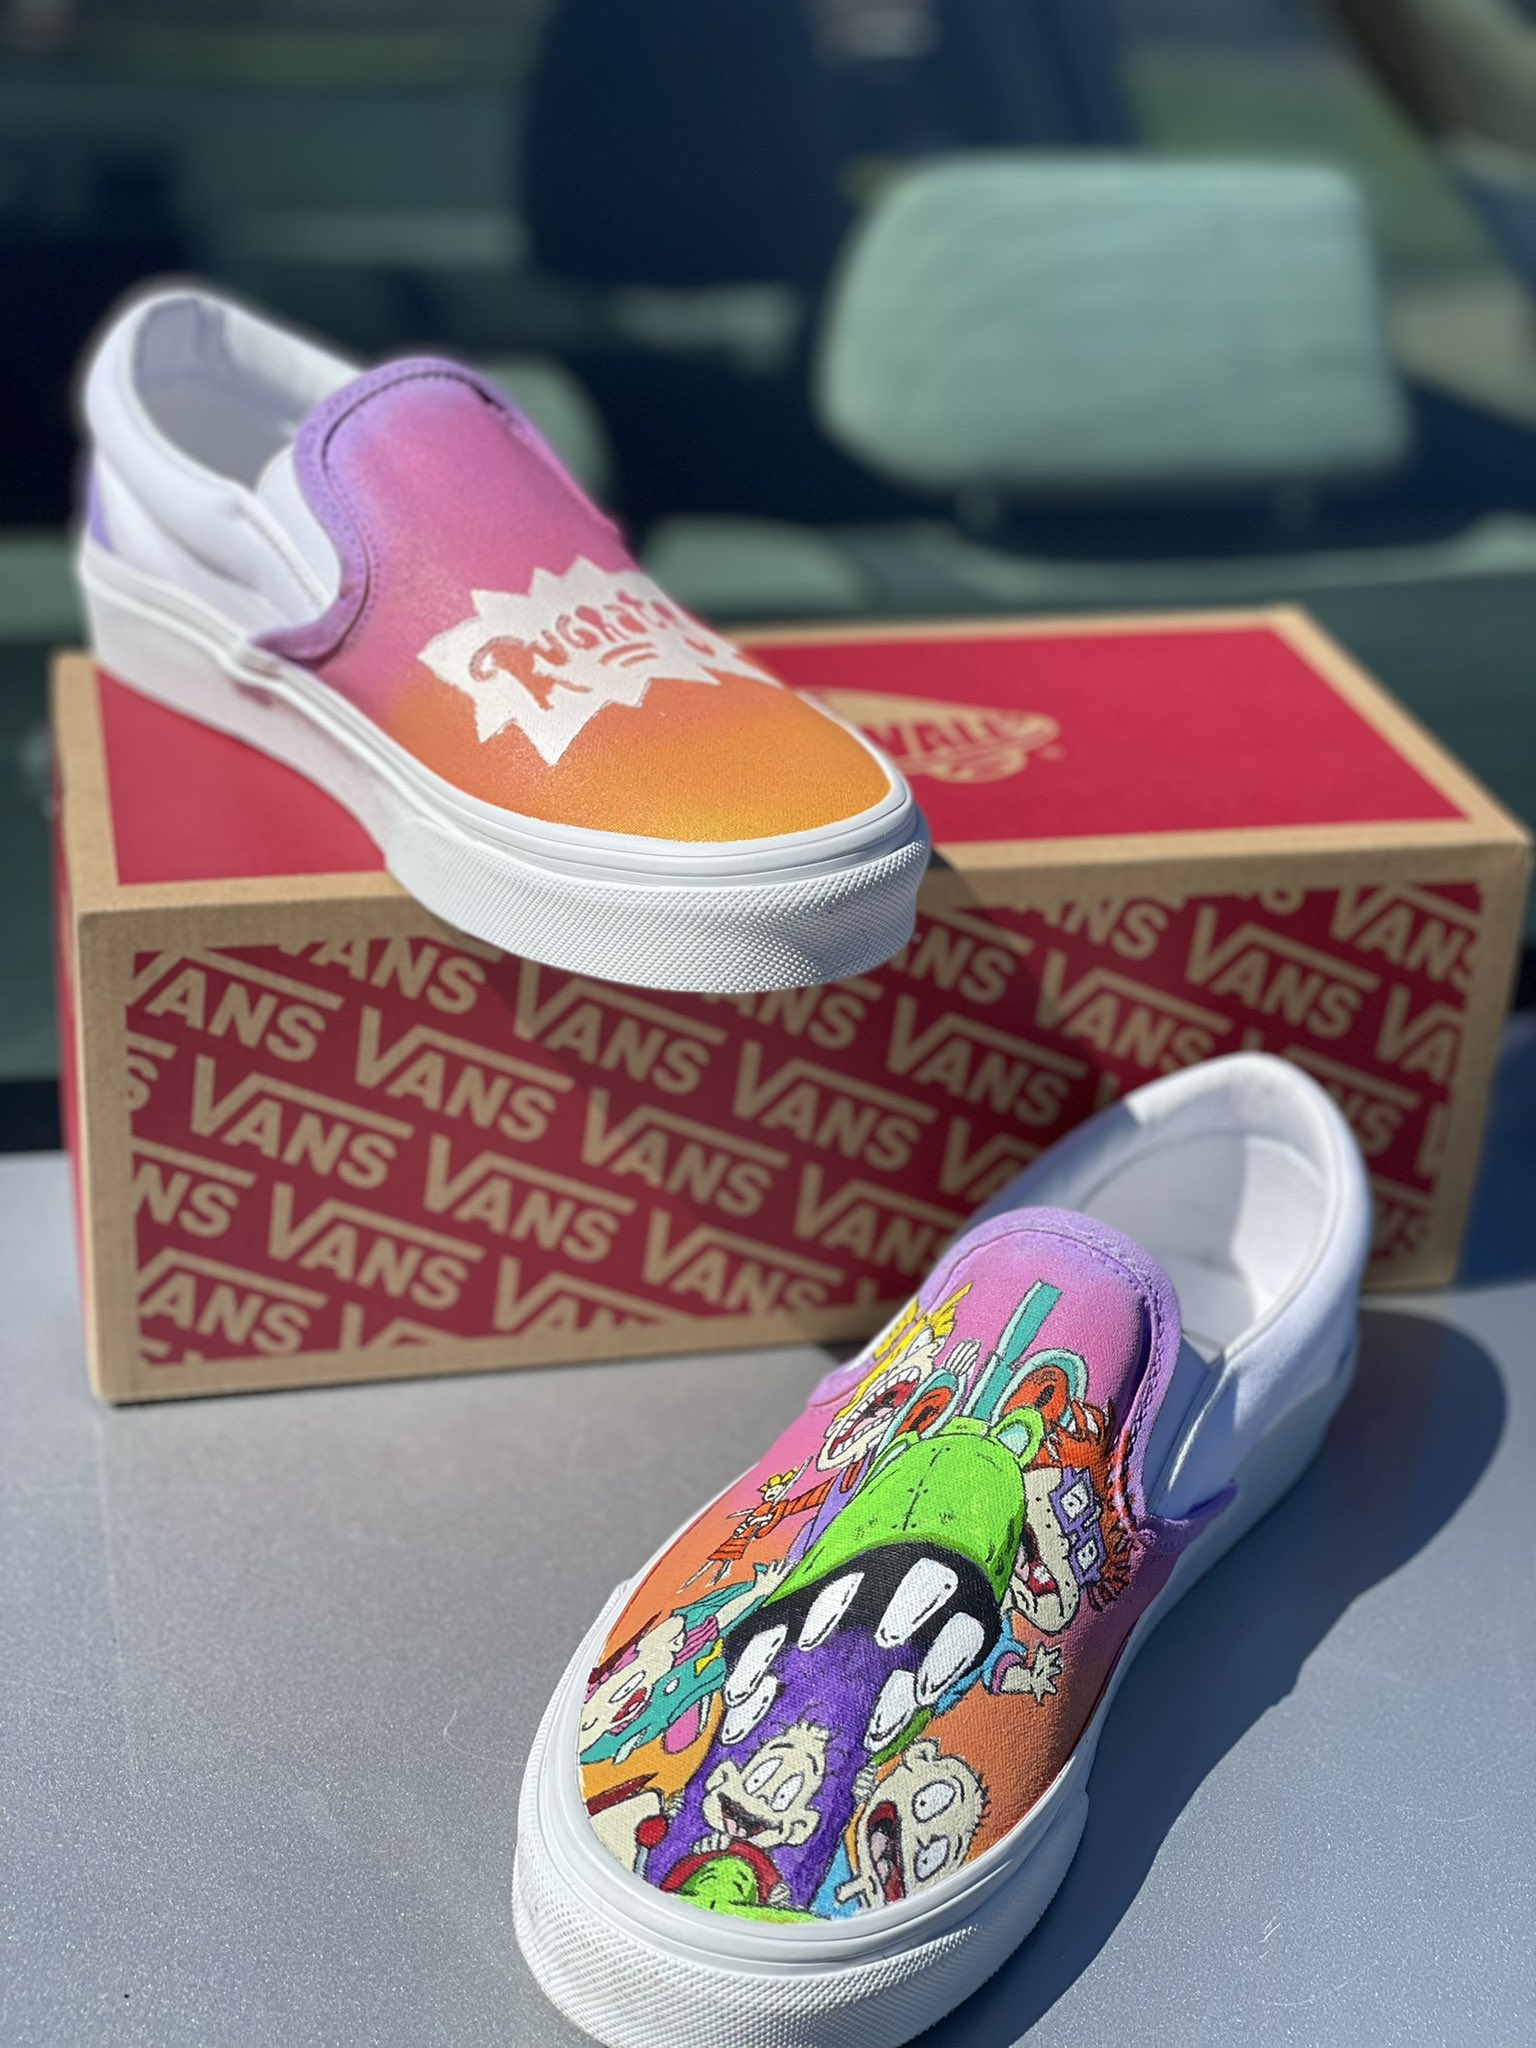 Ruff Customz on Twitter: "“One for all and Balls at fun” - Tommy Pickles  Check out the new Rugrats Theme Customs Vans🔥👟‼️ #rugratstheme #rugrats  #custom #custommade #customshoes #customvans #vans #vansshoes  #angelusdirect #angeluspaint #